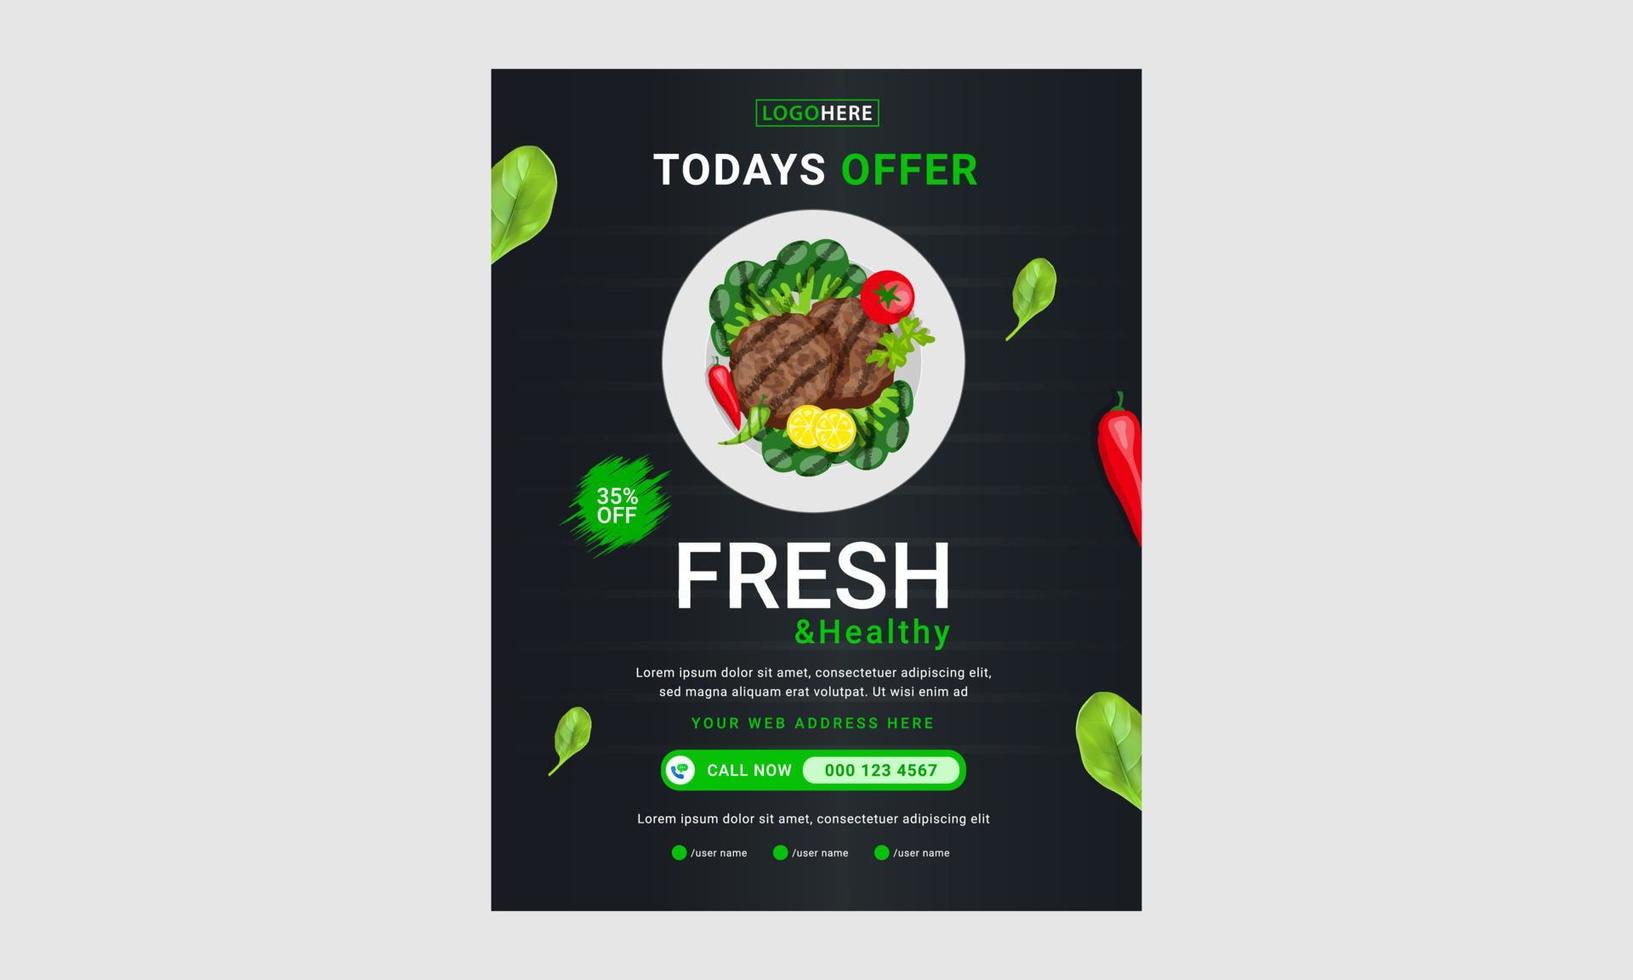 Food menu, brochure, flyer design templates in A4 size. Vector illustrations for food and drink marketing material, ads, natural products presentation templates, cover design.